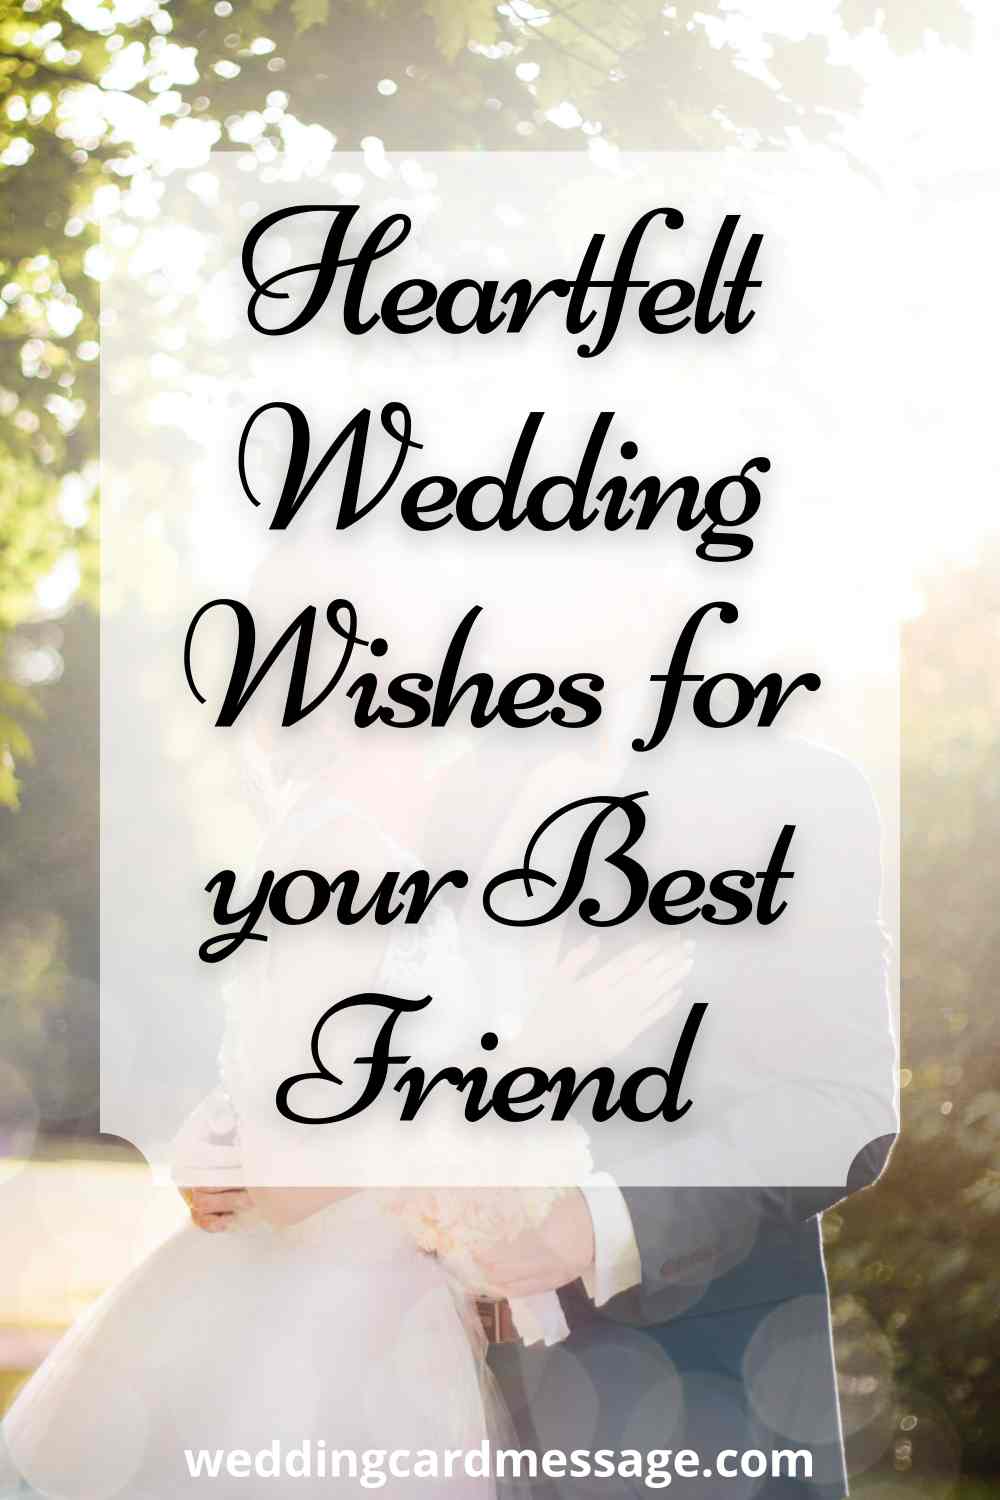 Wedding Card Messages Top 100 Wedding Wishes & Sayings Wedding Card